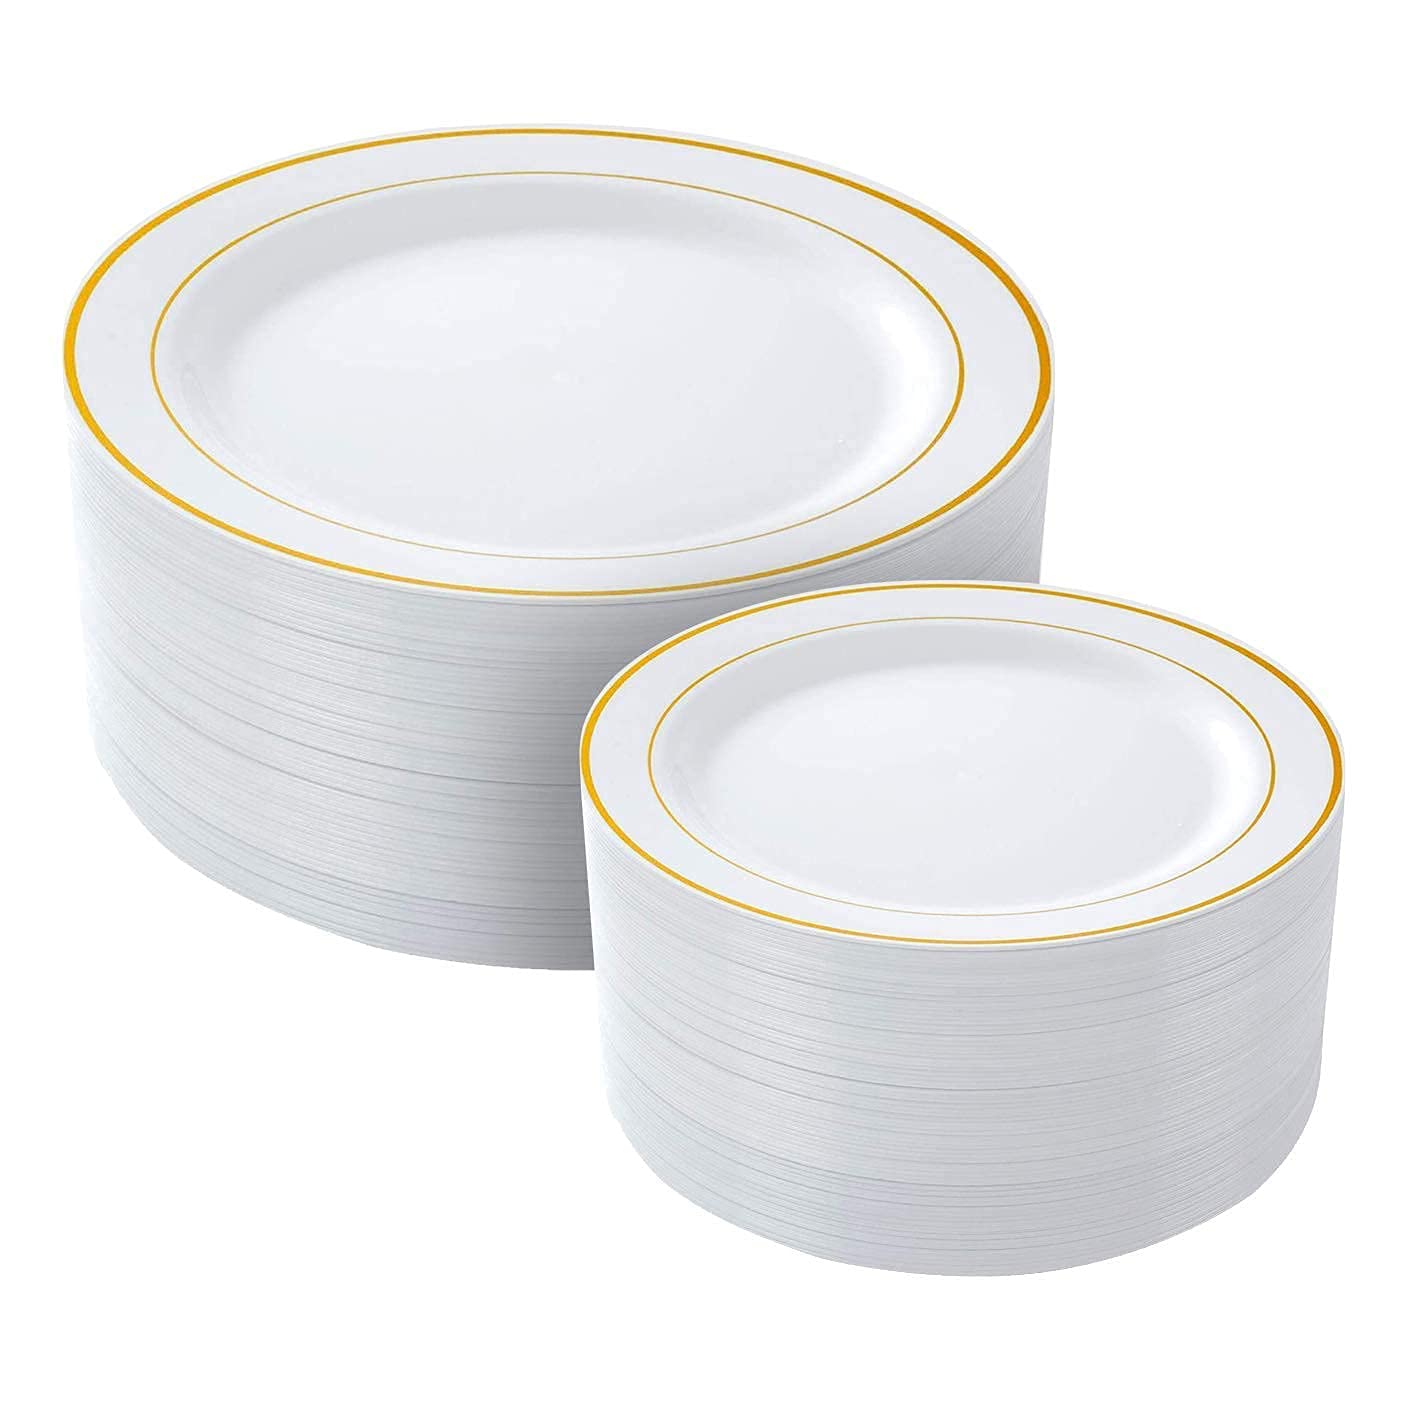 350-Piece Gold Dinnerware set for 50 guests Includes: 100 gold rim plastic plates, 250 gold plastic silverware utensils